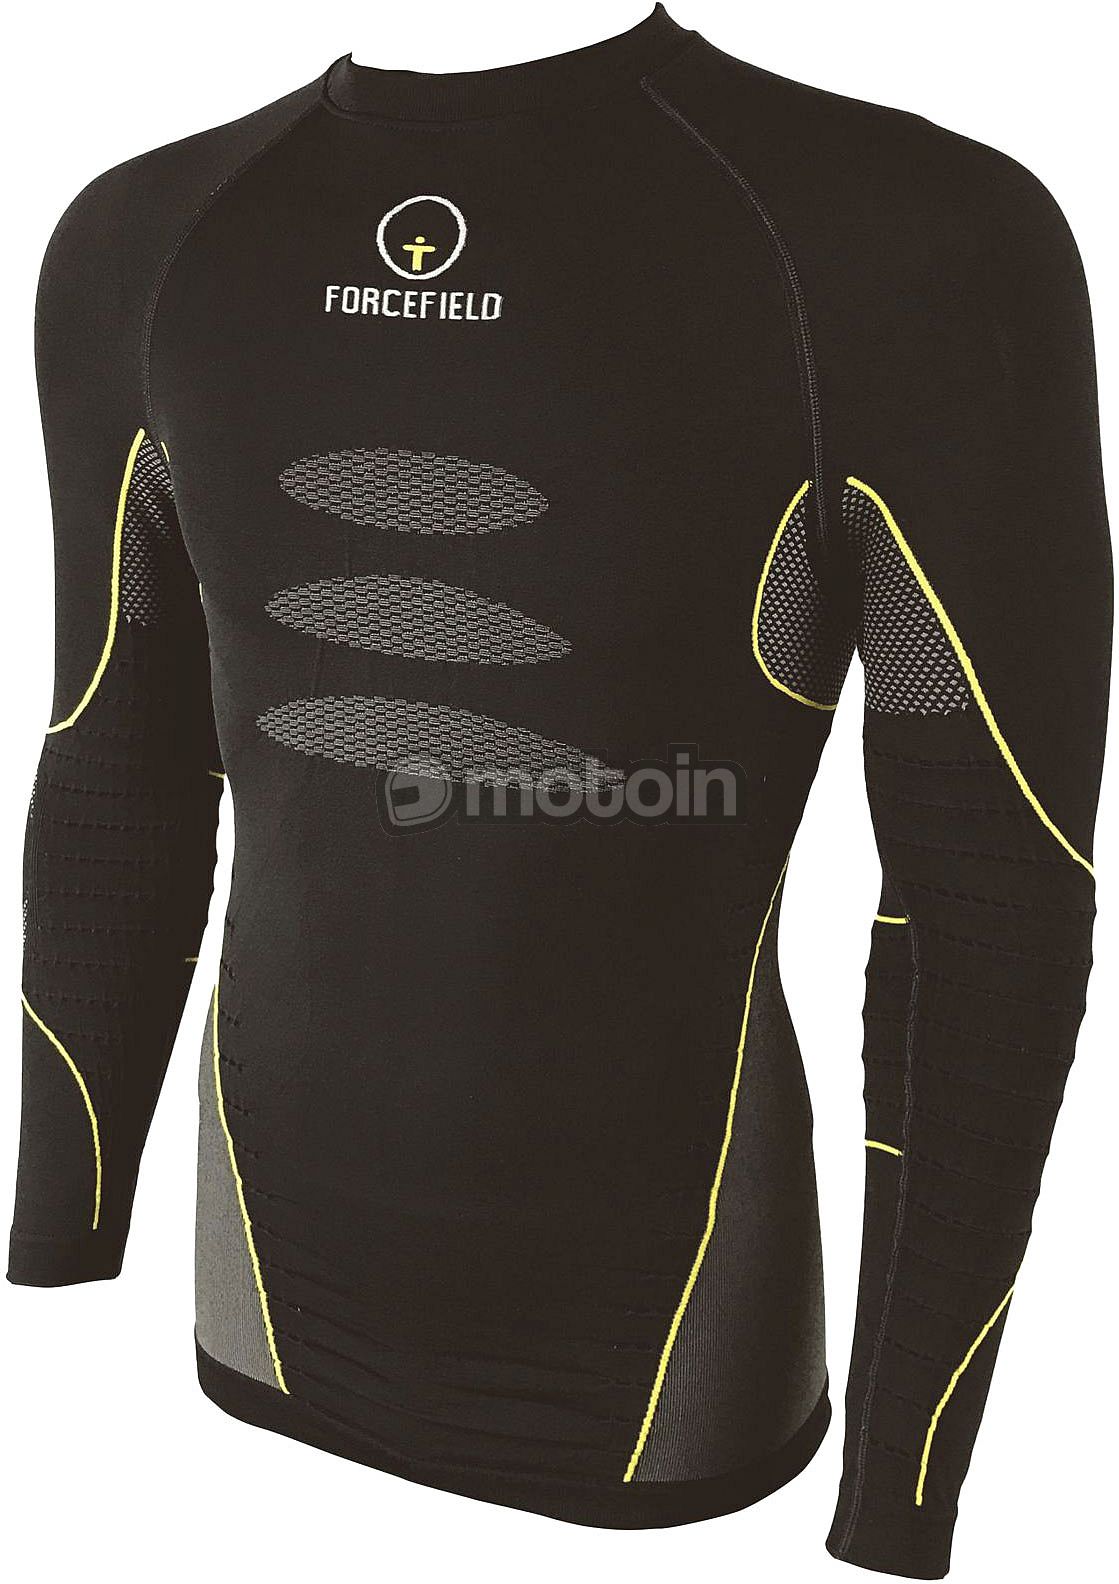 Forcefield Tech 3 Base, Funktionsshirt